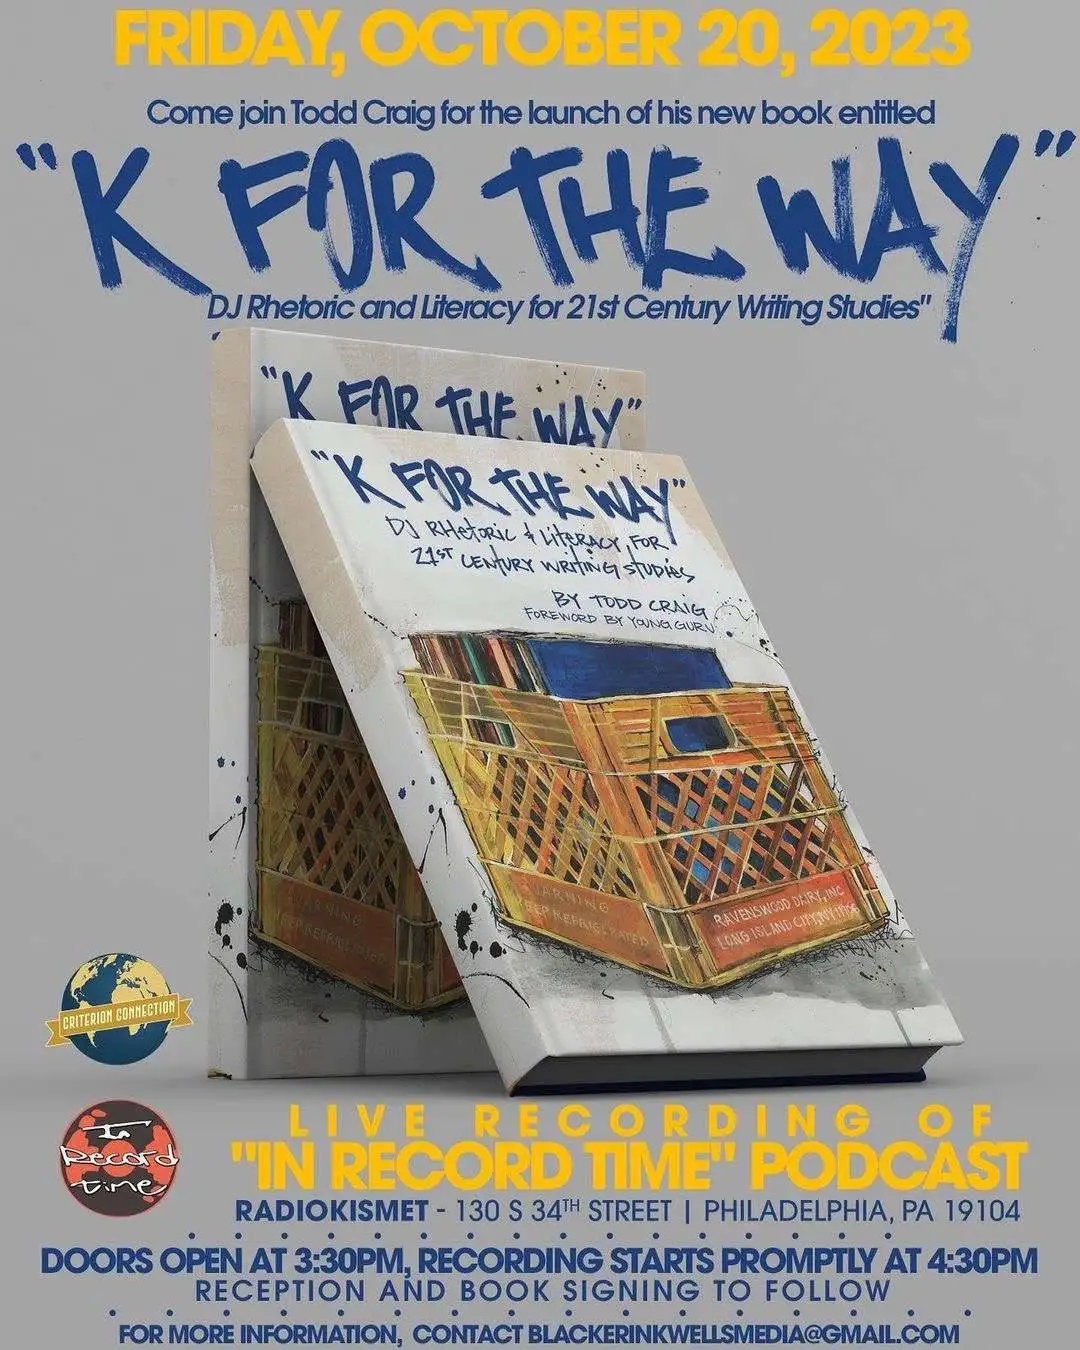 A graphic advertising Dr. Craig's book, "K for the Way."